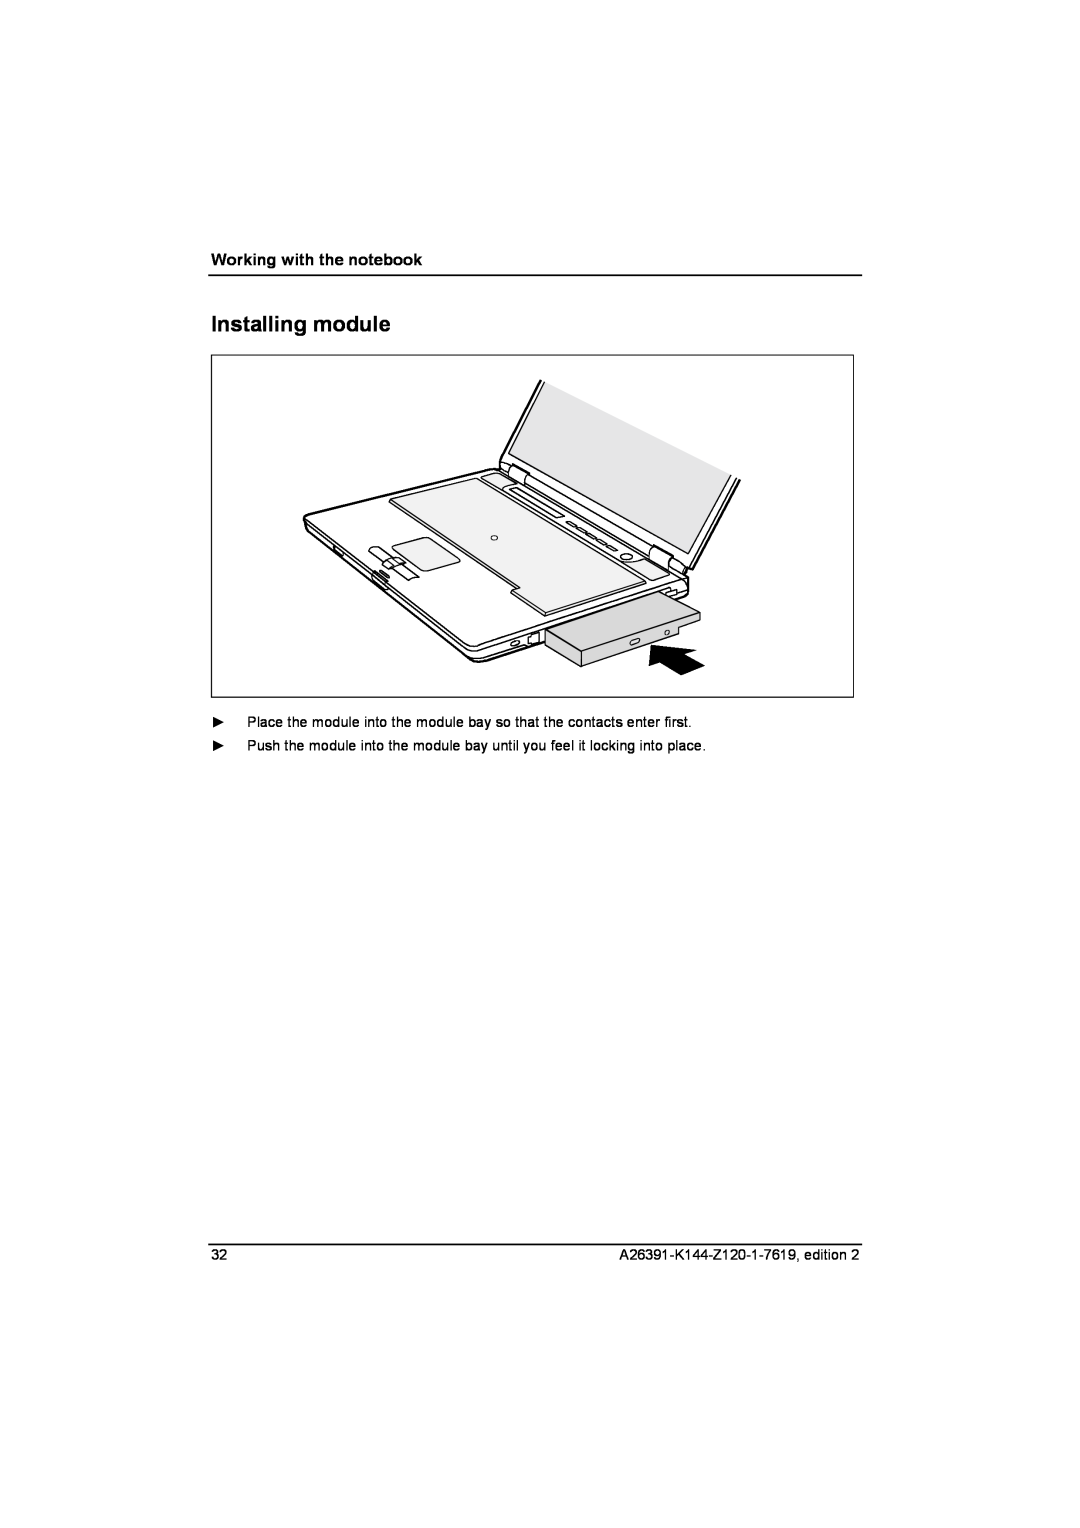 Fujitsu S SERIES manual Installing module, Working with the notebook, A26391-K144-Z120-1-7619, edition 